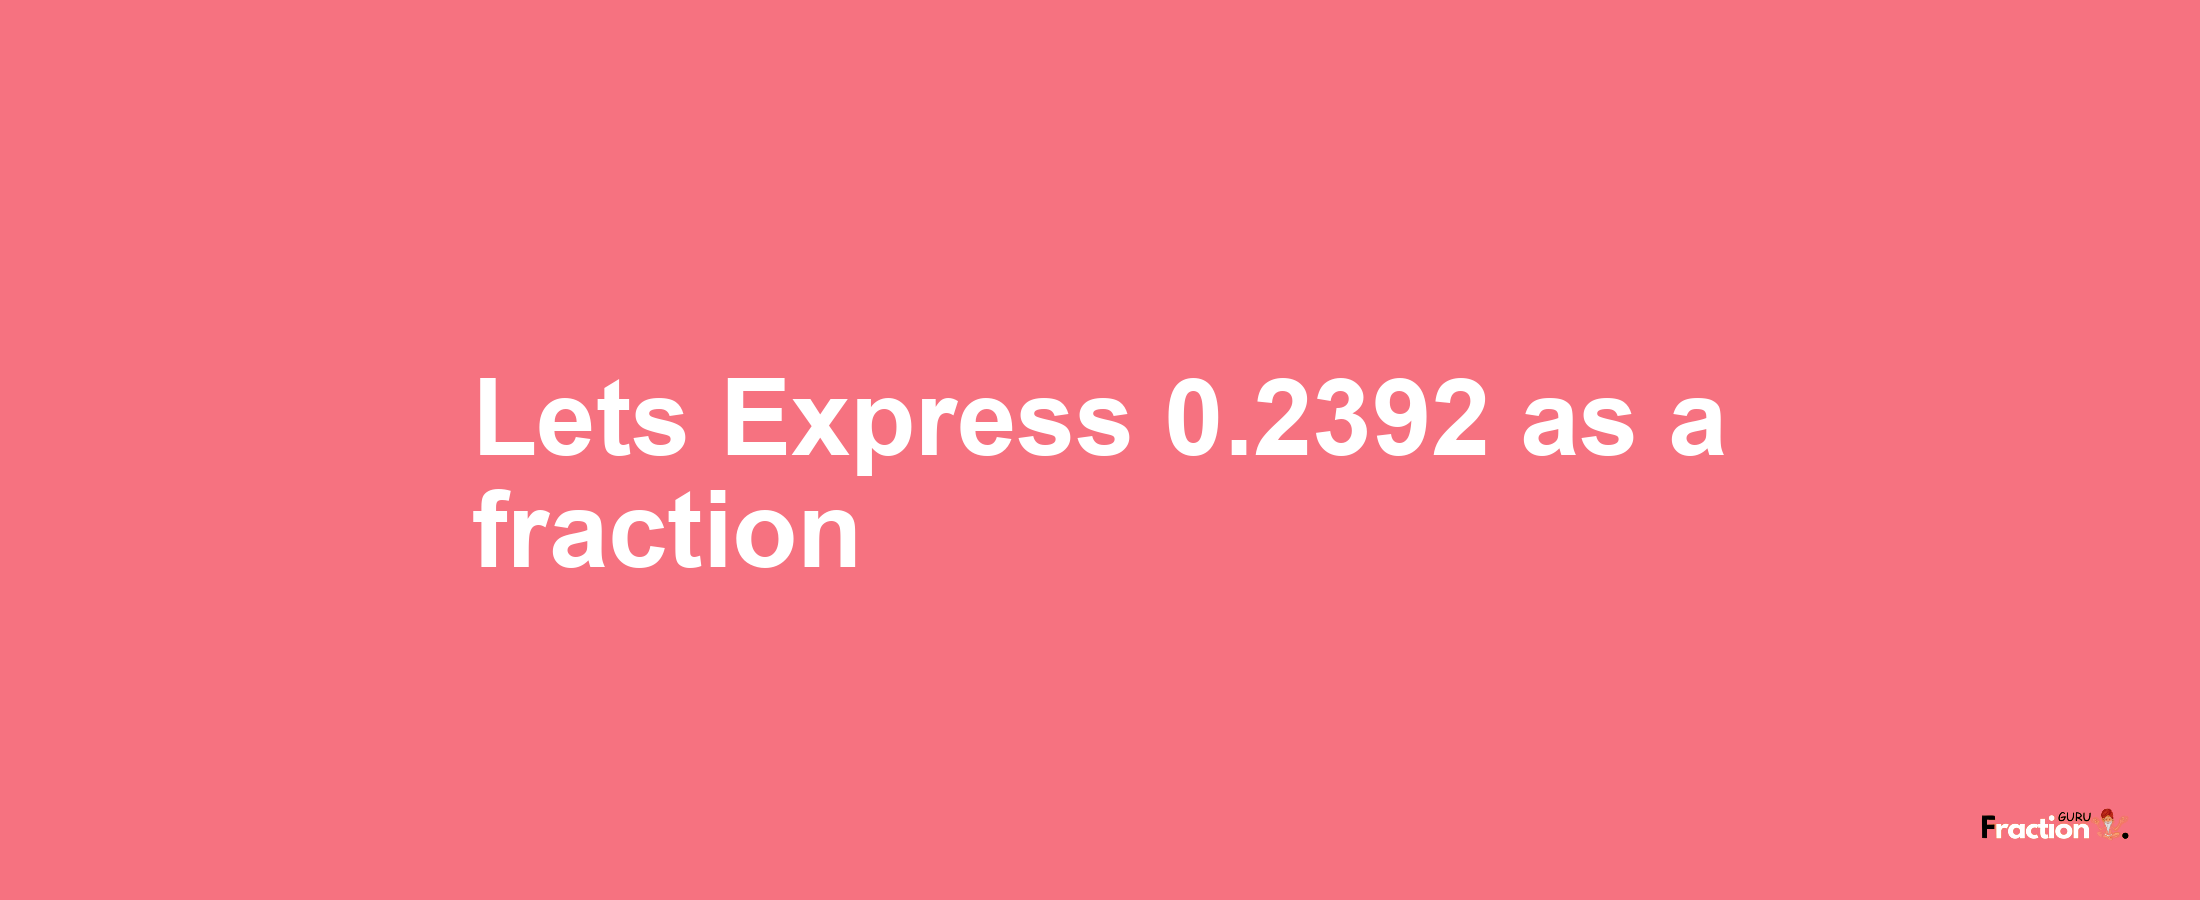 Lets Express 0.2392 as afraction